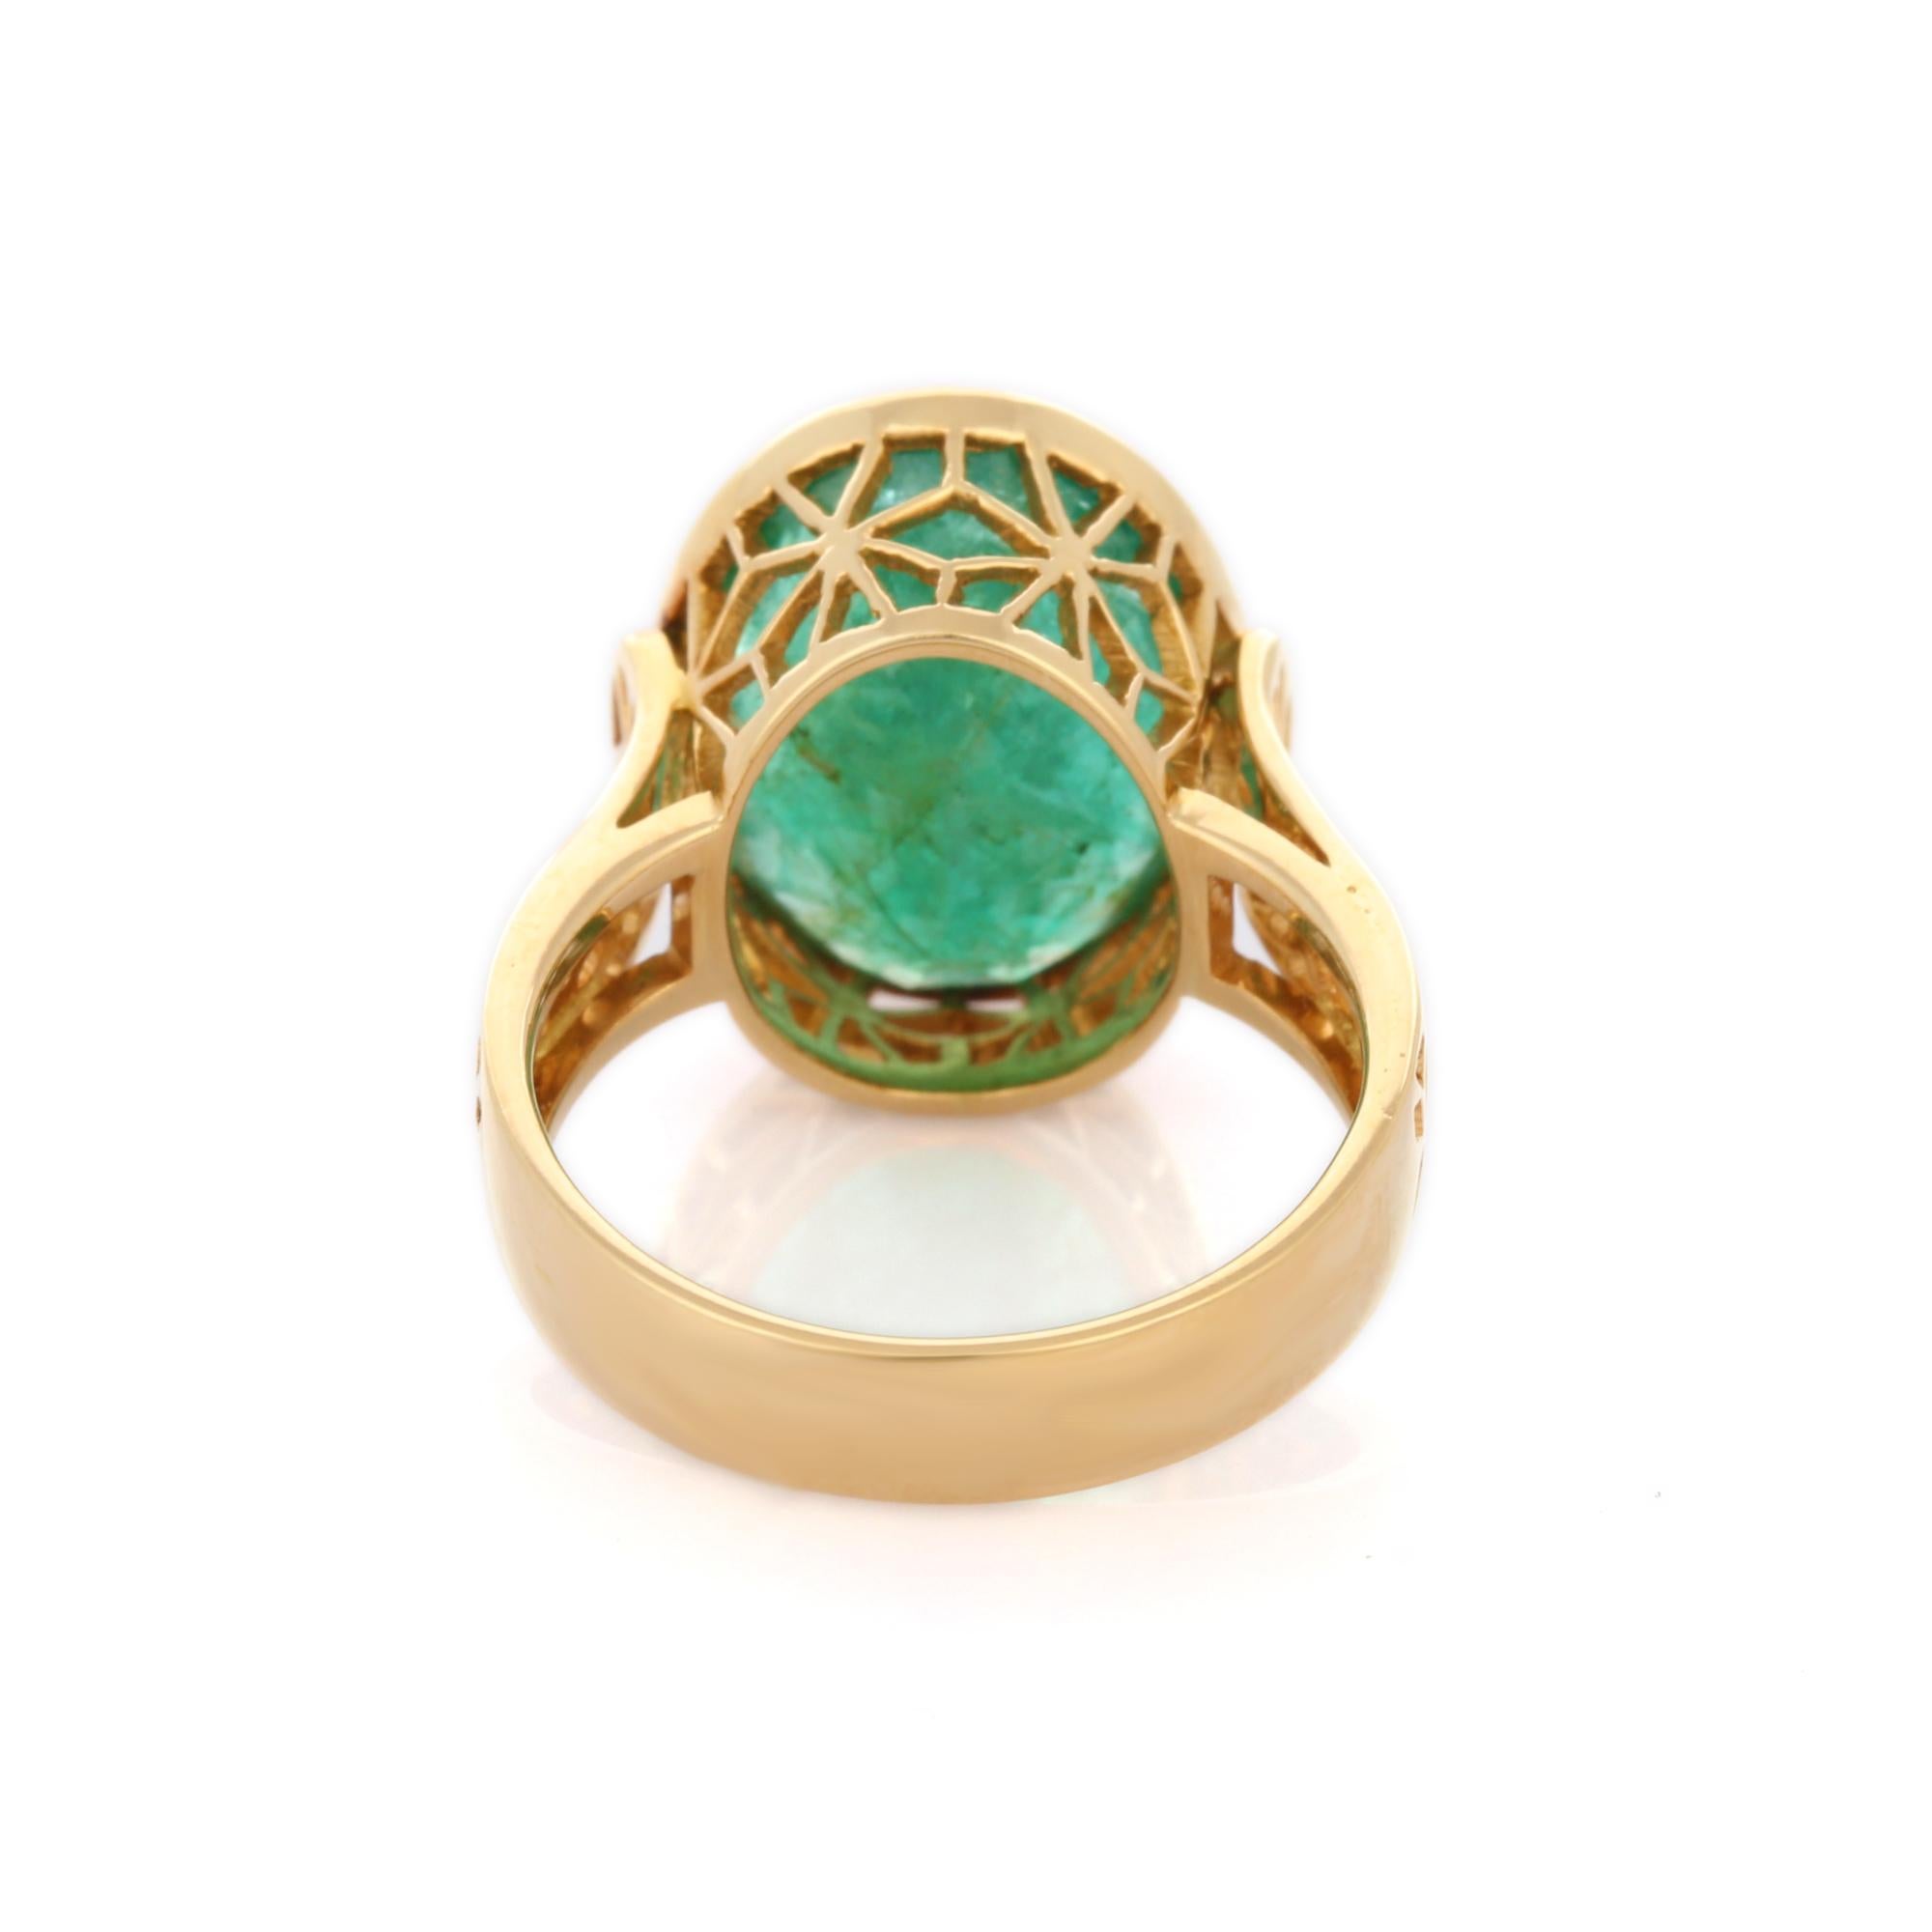 For Sale:  Natural Certified 7.76 Carats Emerald Ring in 18k Solid Yellow Gold 4